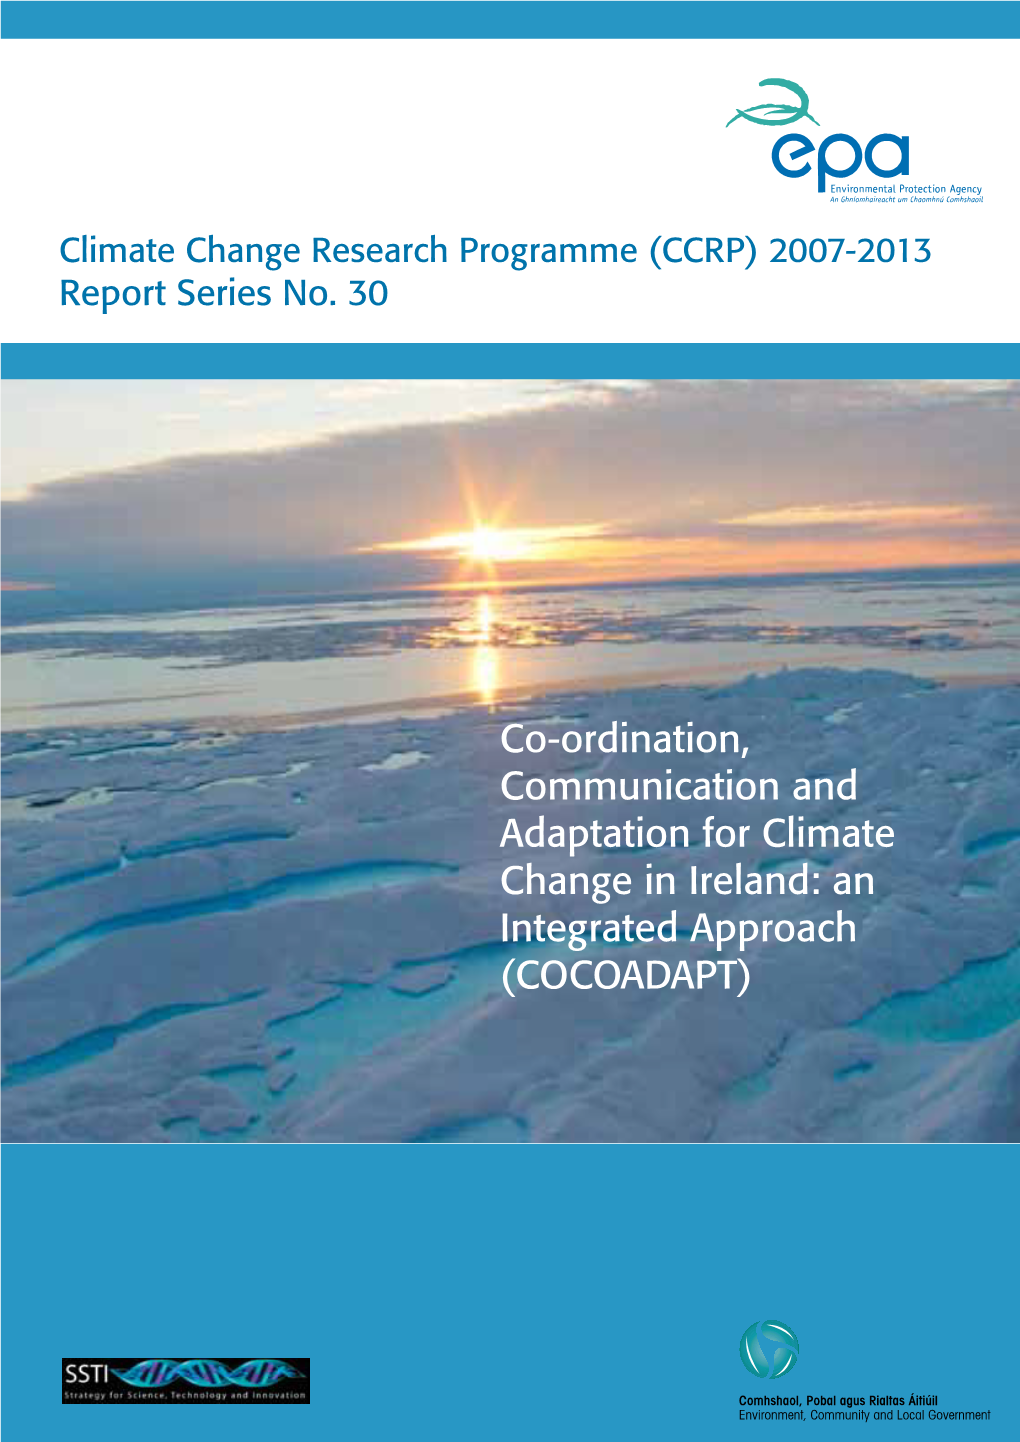 Co-Ordination, Communication and Adaptation for Climate Change in Ireland: an Integrated Approach (COCOADAPT)